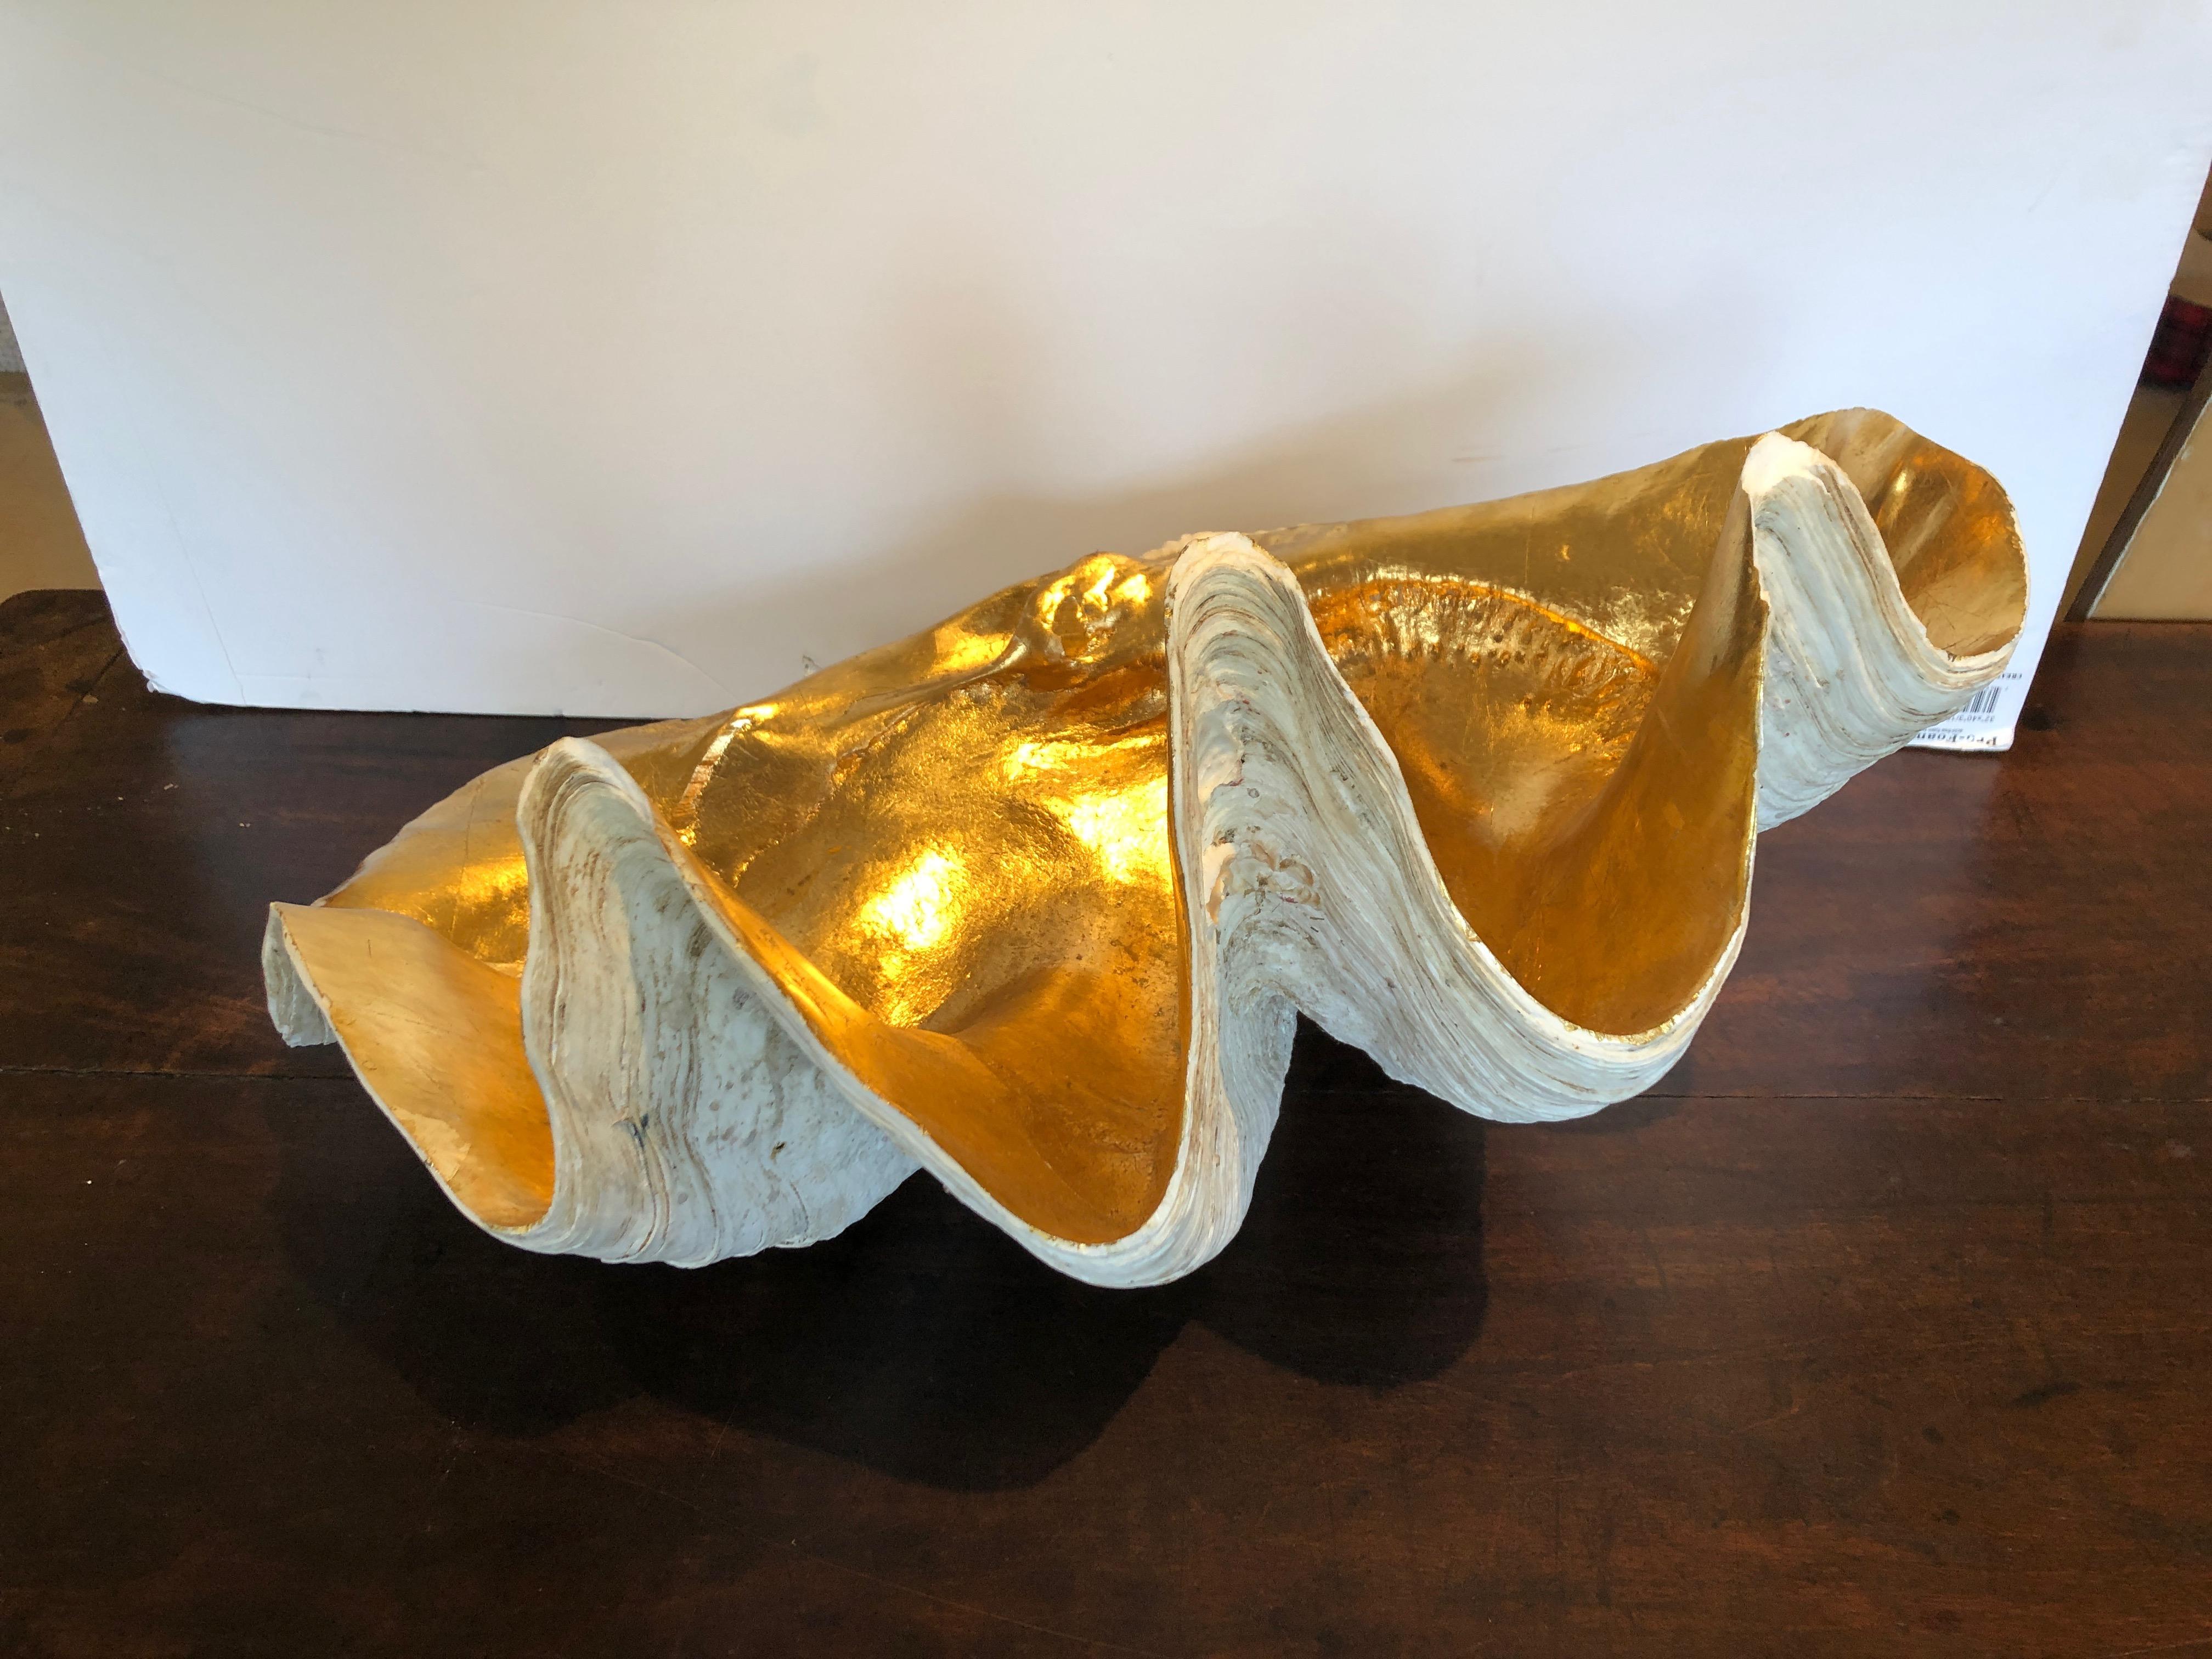 A magnificent tabletop accessory sculpture that originated as an authentic impressively large clam shell, newly glamorized by hand with gold leaf on the interior.